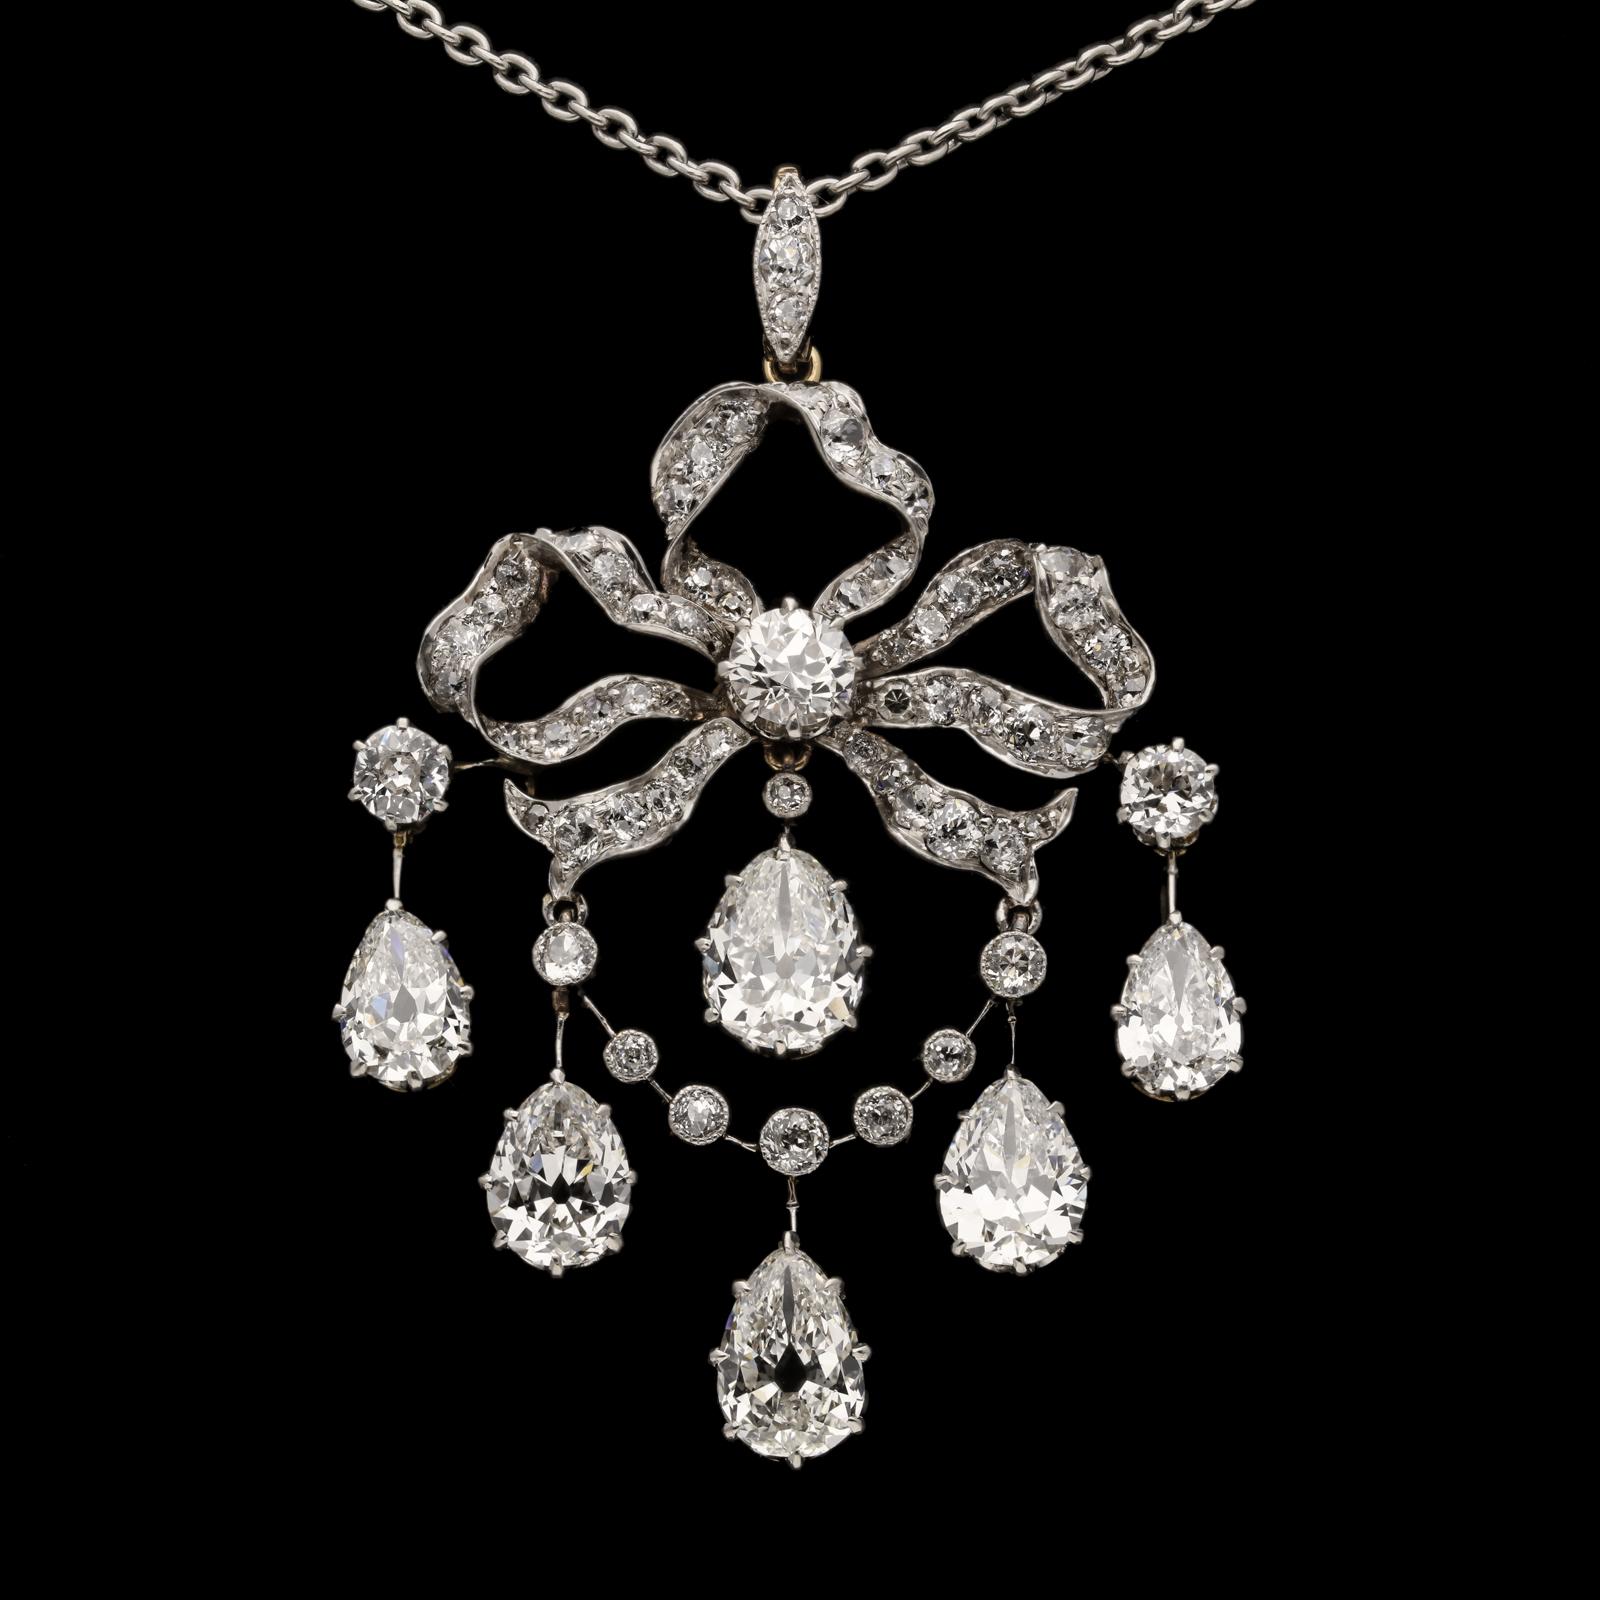 A beautiful Edwardian old mine diamond drop pendant c.1910, of ribbon bow and swag design set throughout with old-cut diamonds and suspending six pear shape diamonds to form an articulated fringe, all in platinum backed with gold and with a fine